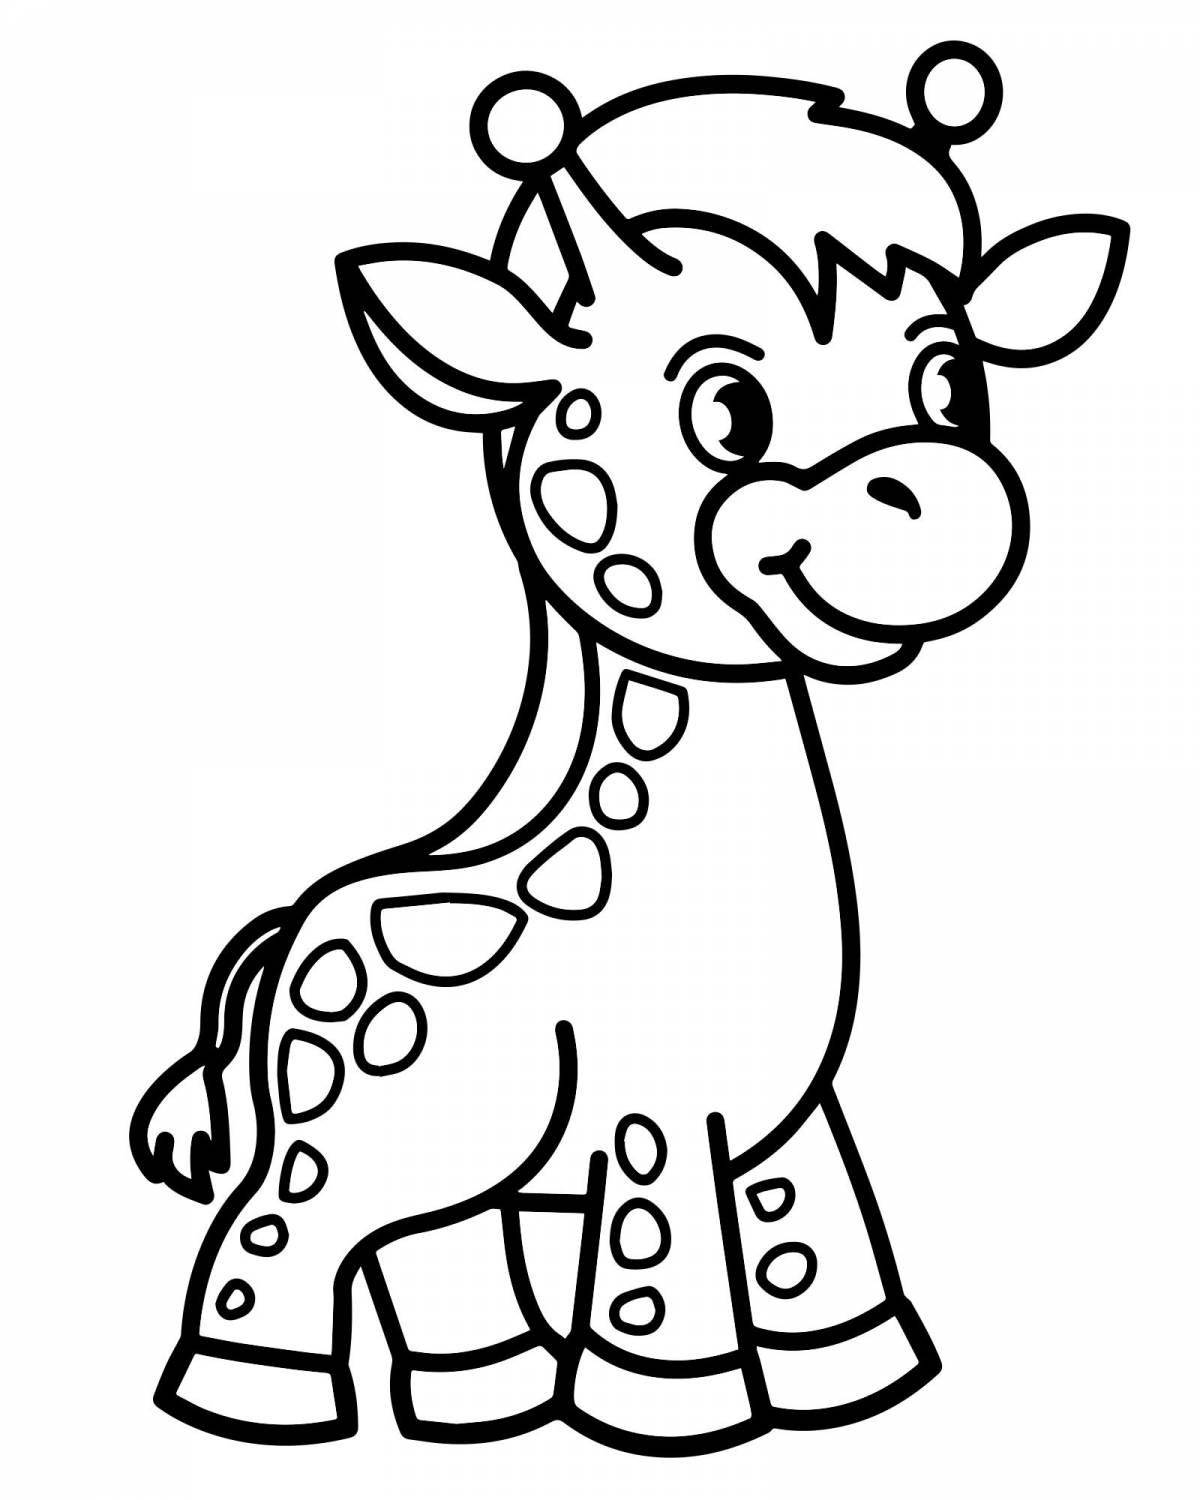 Adorable giraffe coloring book for 4-5 year olds